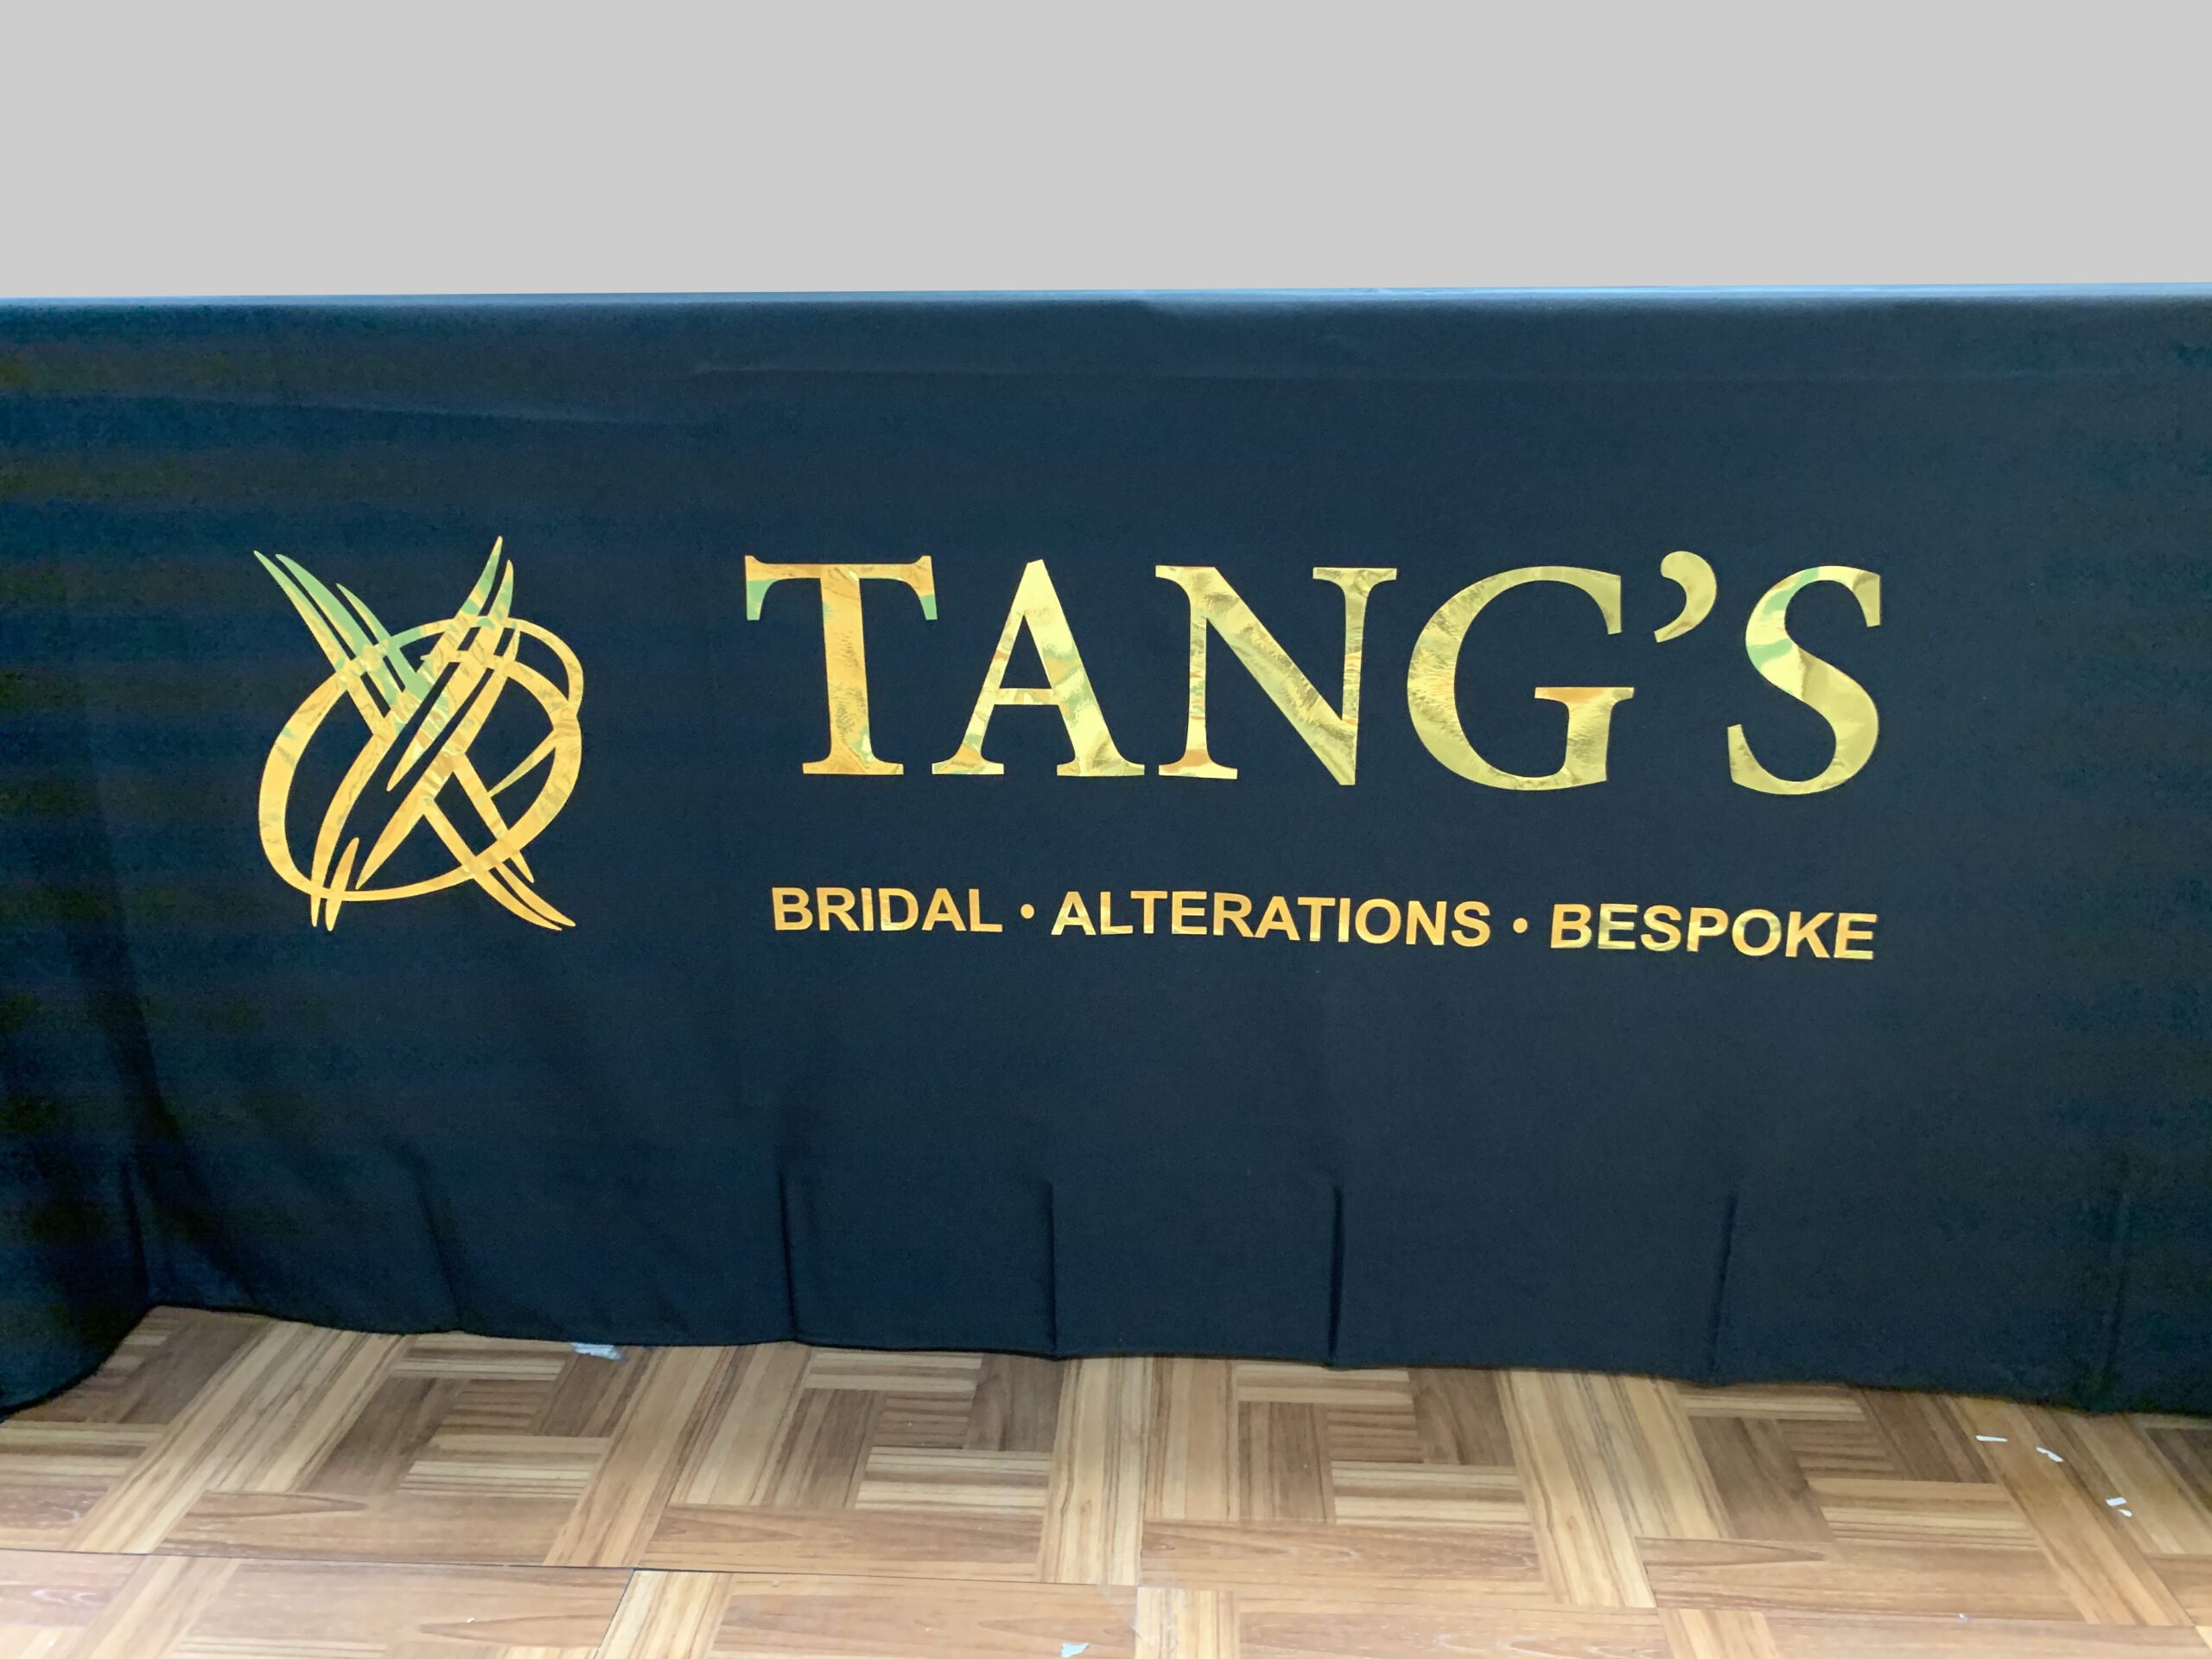 Metallic bright gold table cover